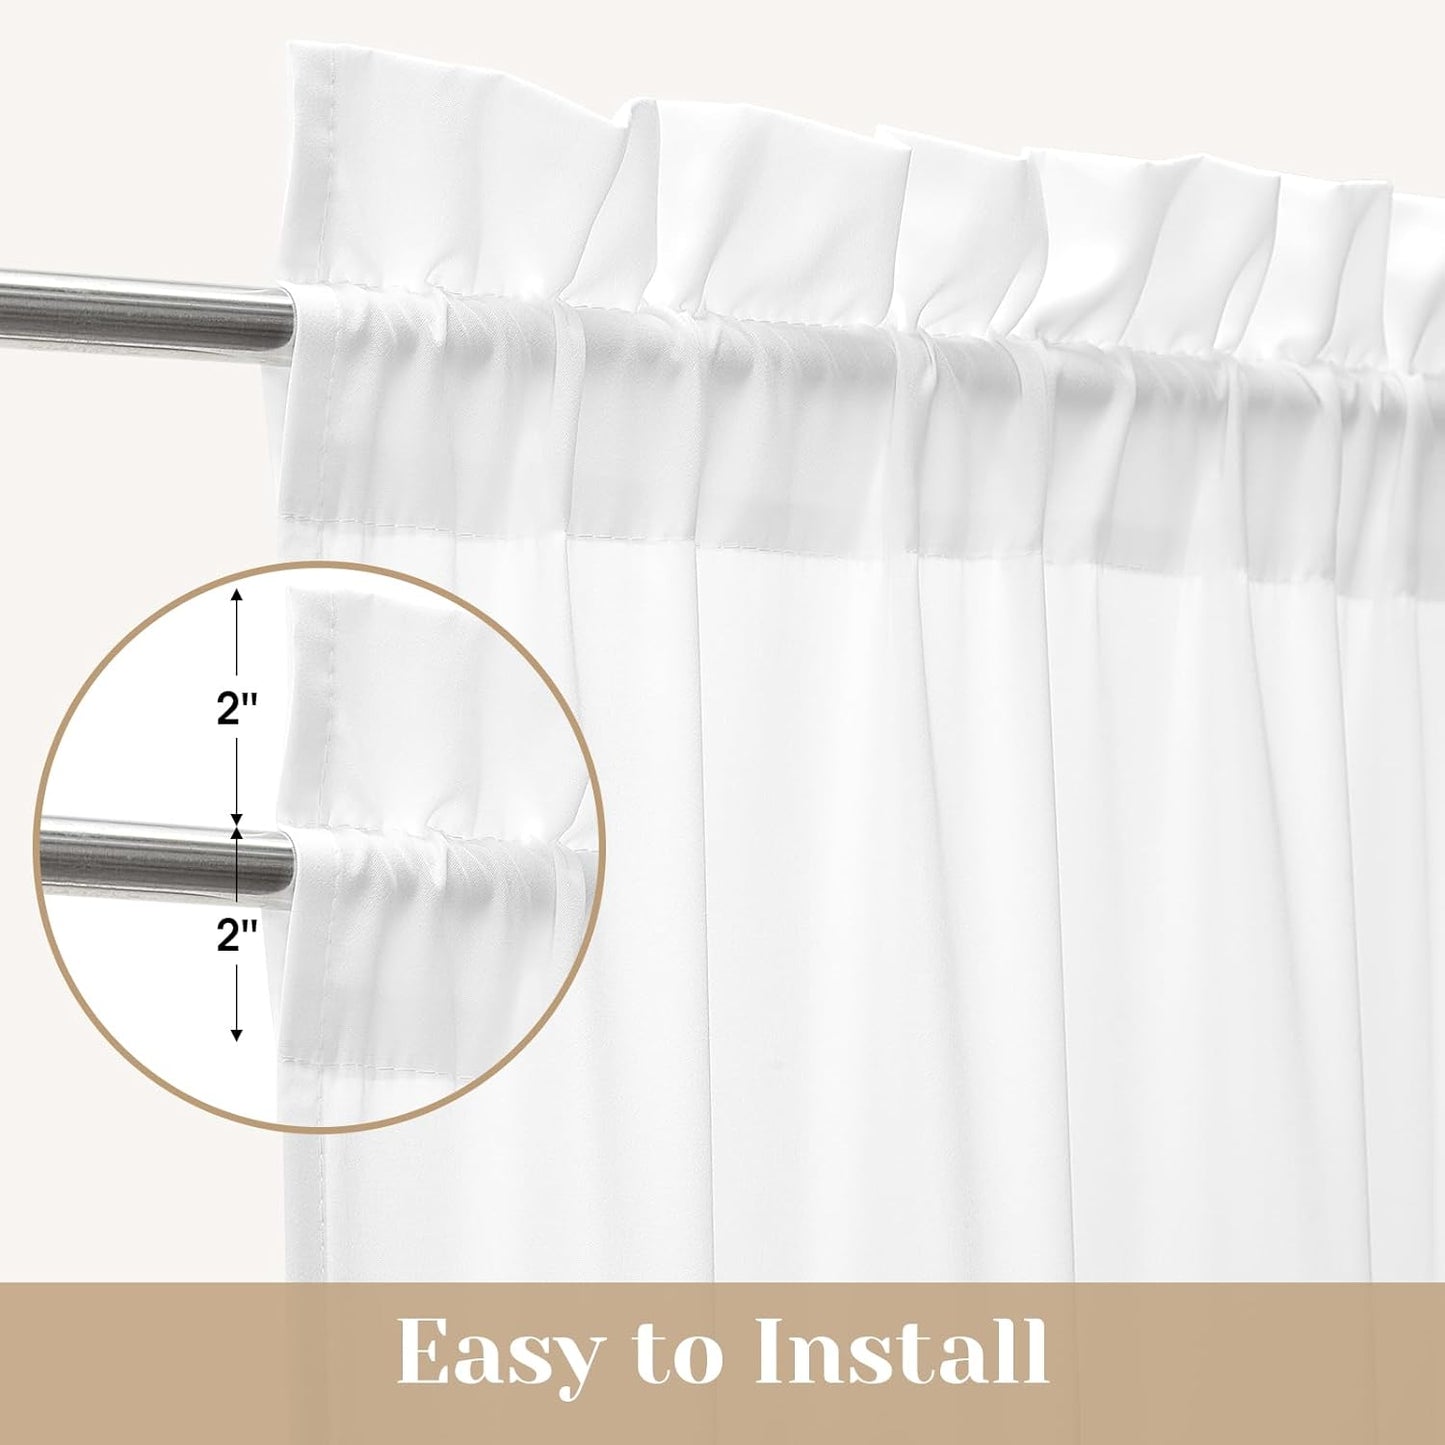 HOMEIDEAS Non-See-Through Sidelight Curtains for Front Door, Privacy Semi Sheer Door Window Curtains, Rod Pocket Light Filtering French Door Curtains with Tieback, (1 Panel, White, 26W X 72L)  HOMEIDEAS   